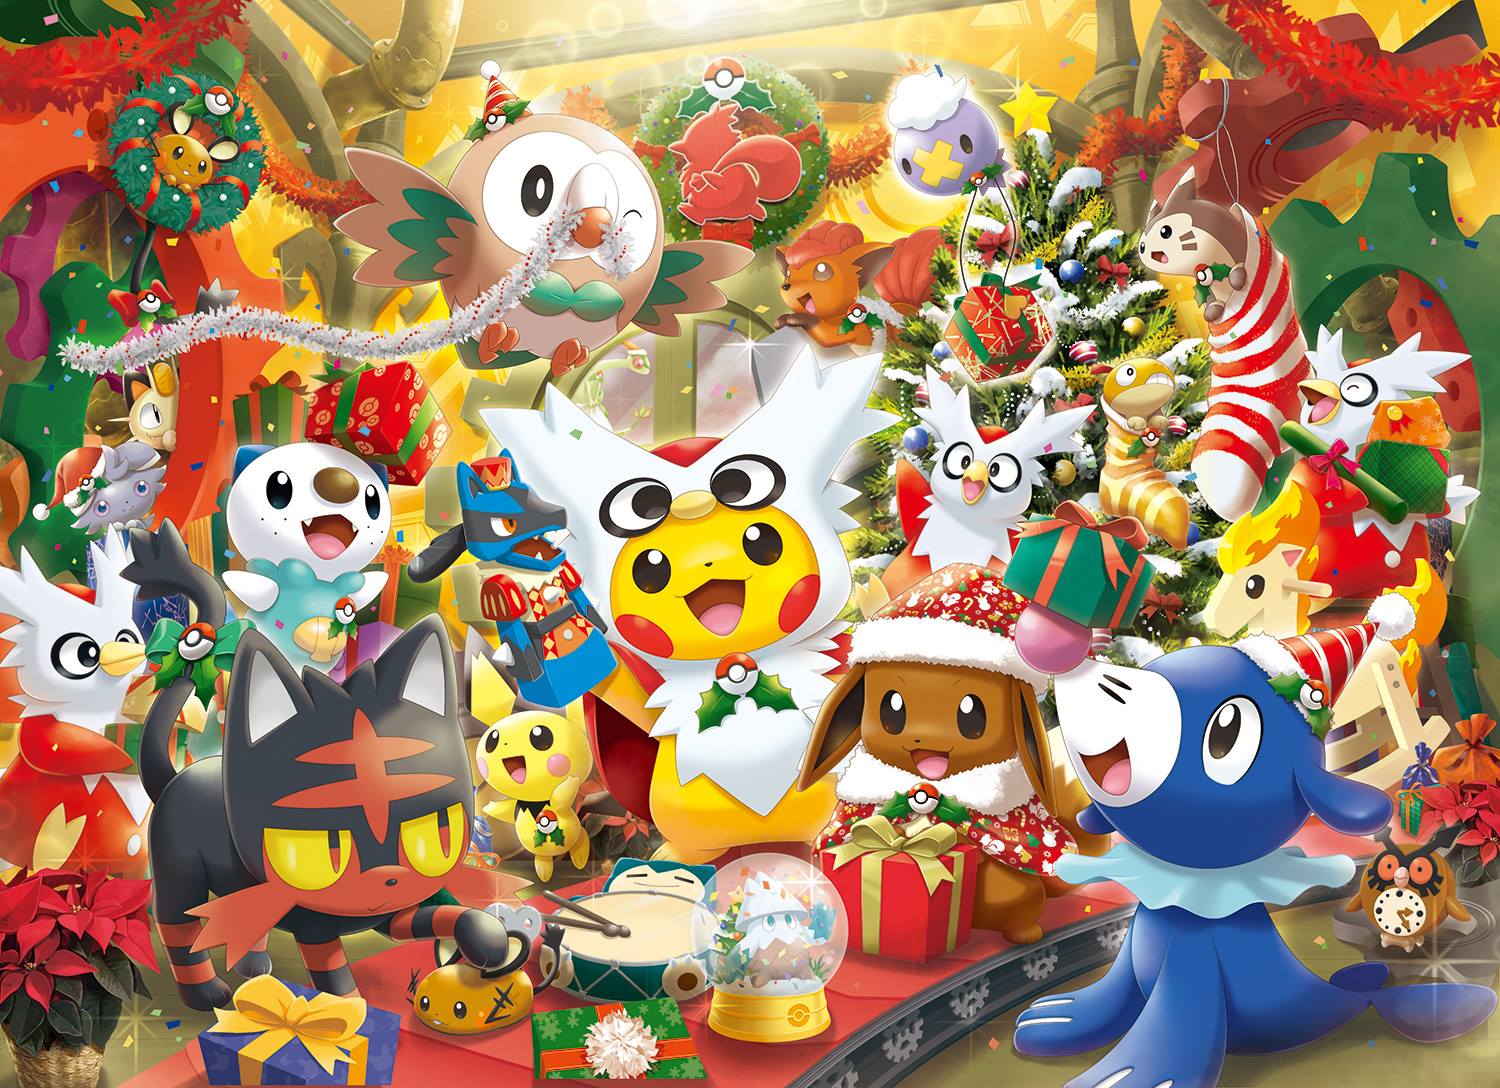 This ridiculously perfect Pokemon Christmas wallpaper image (Serebii's new Facebook cover image)